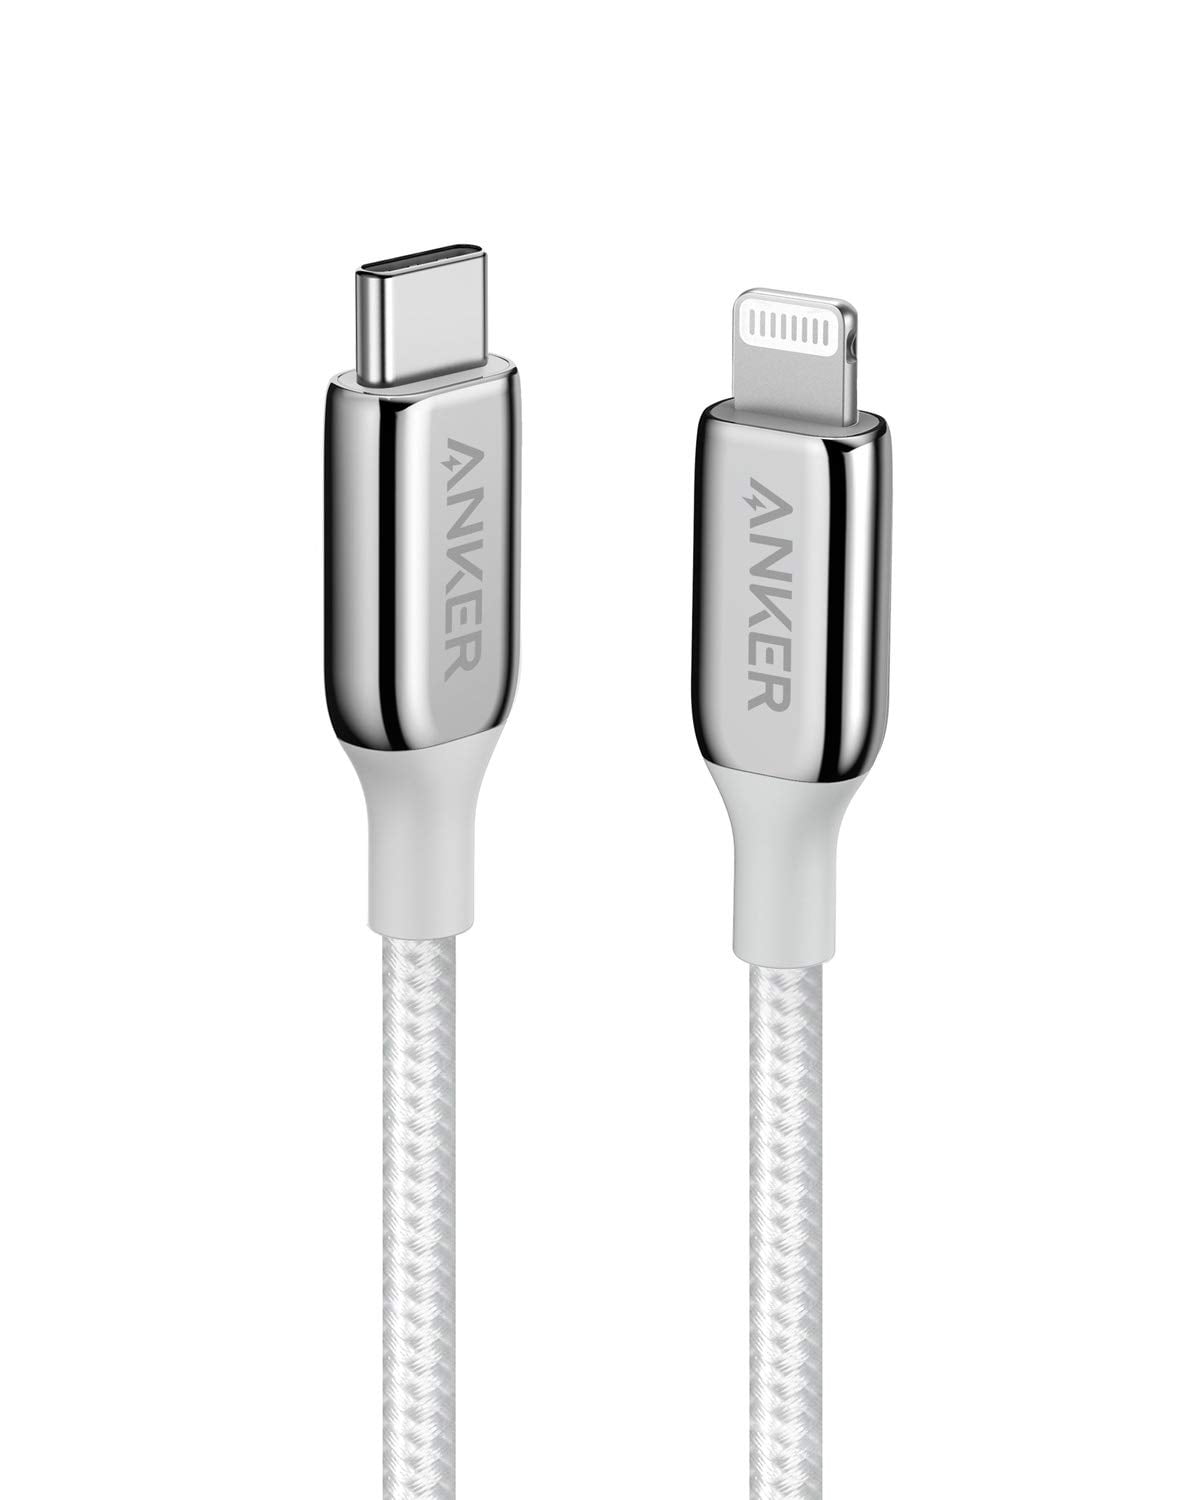 Buy Anker Powerline III USB C Fast Charging Cable 36ft Nylon Braided  Lightning Cable [Silver] Online at Lowest Price in Ubuy Nepal. 596965365